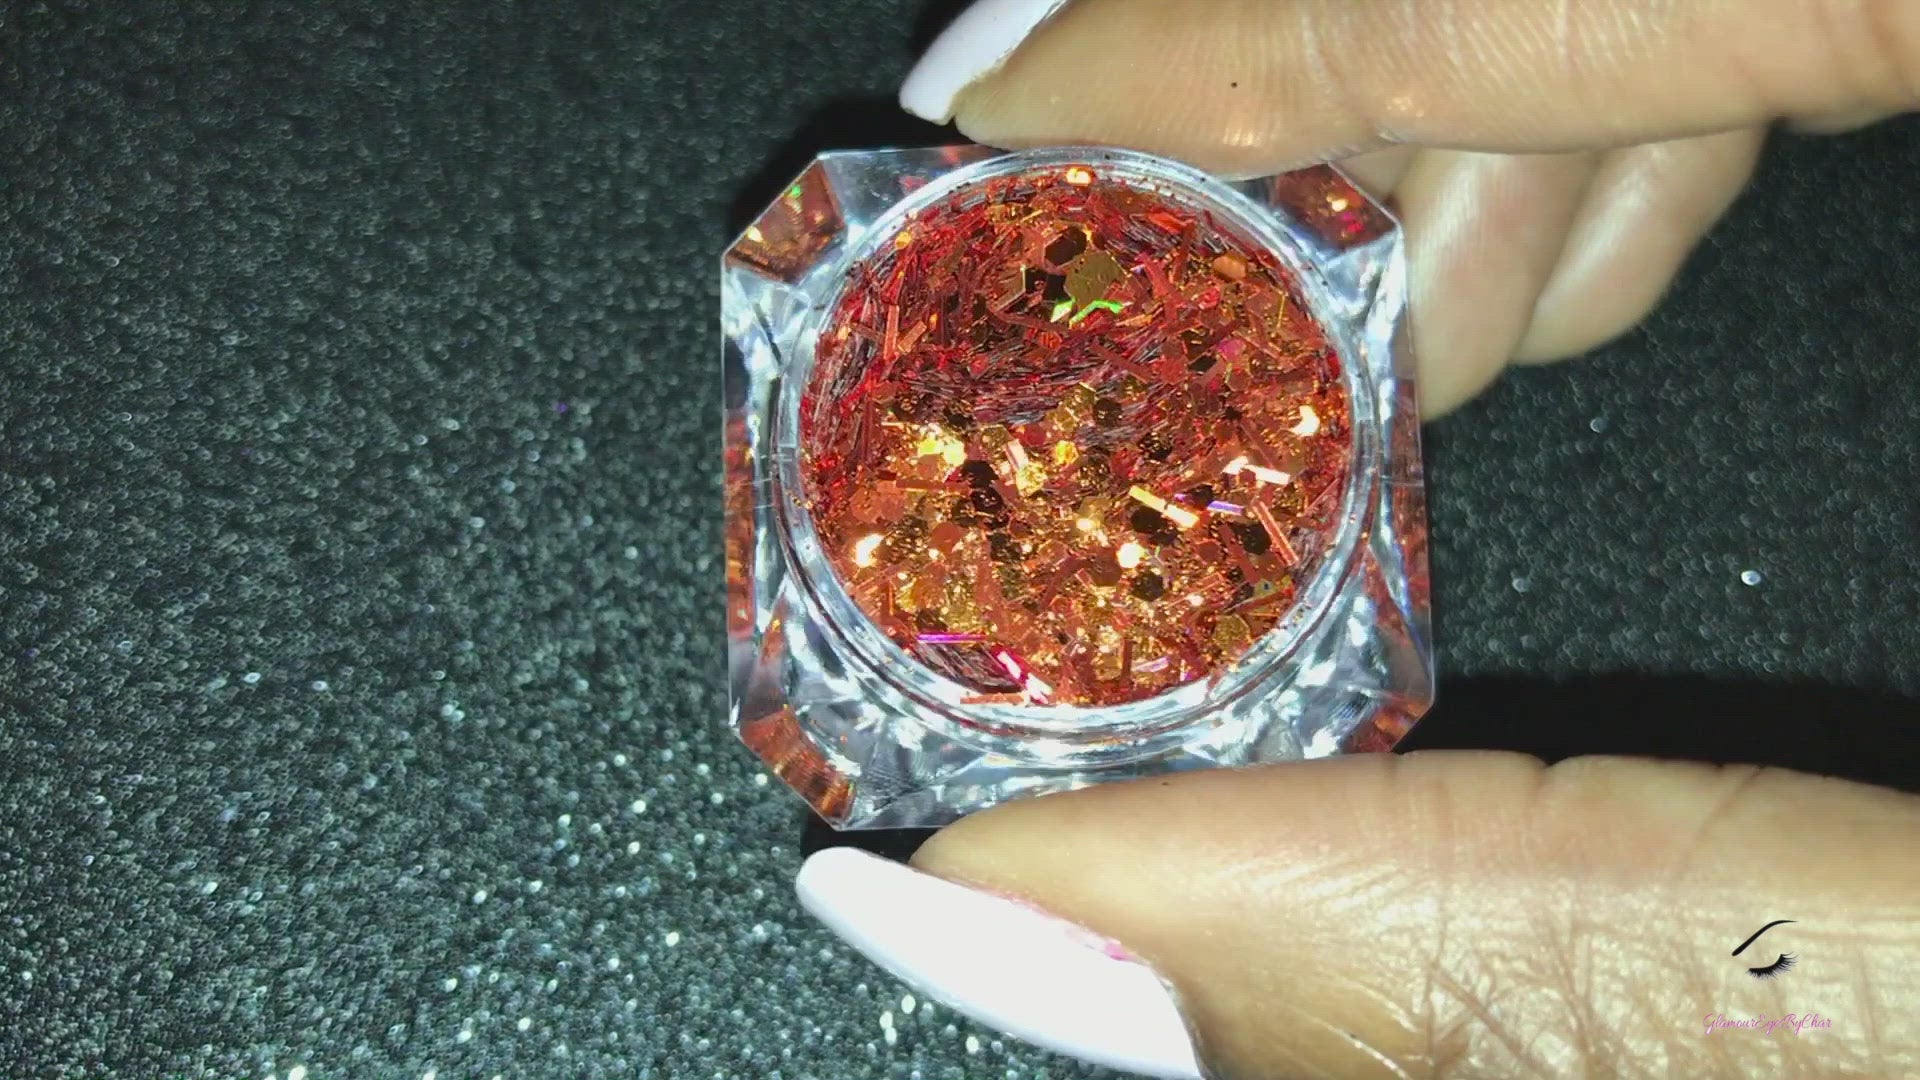 This glitter is called Bronzilla  and is part of the super chunky glitter collection.  It consists of copper glitter with a dazzling holographic sparkle. Bronzilla can be used for your face, body, hair and nails.  Comes in 5g jars only.